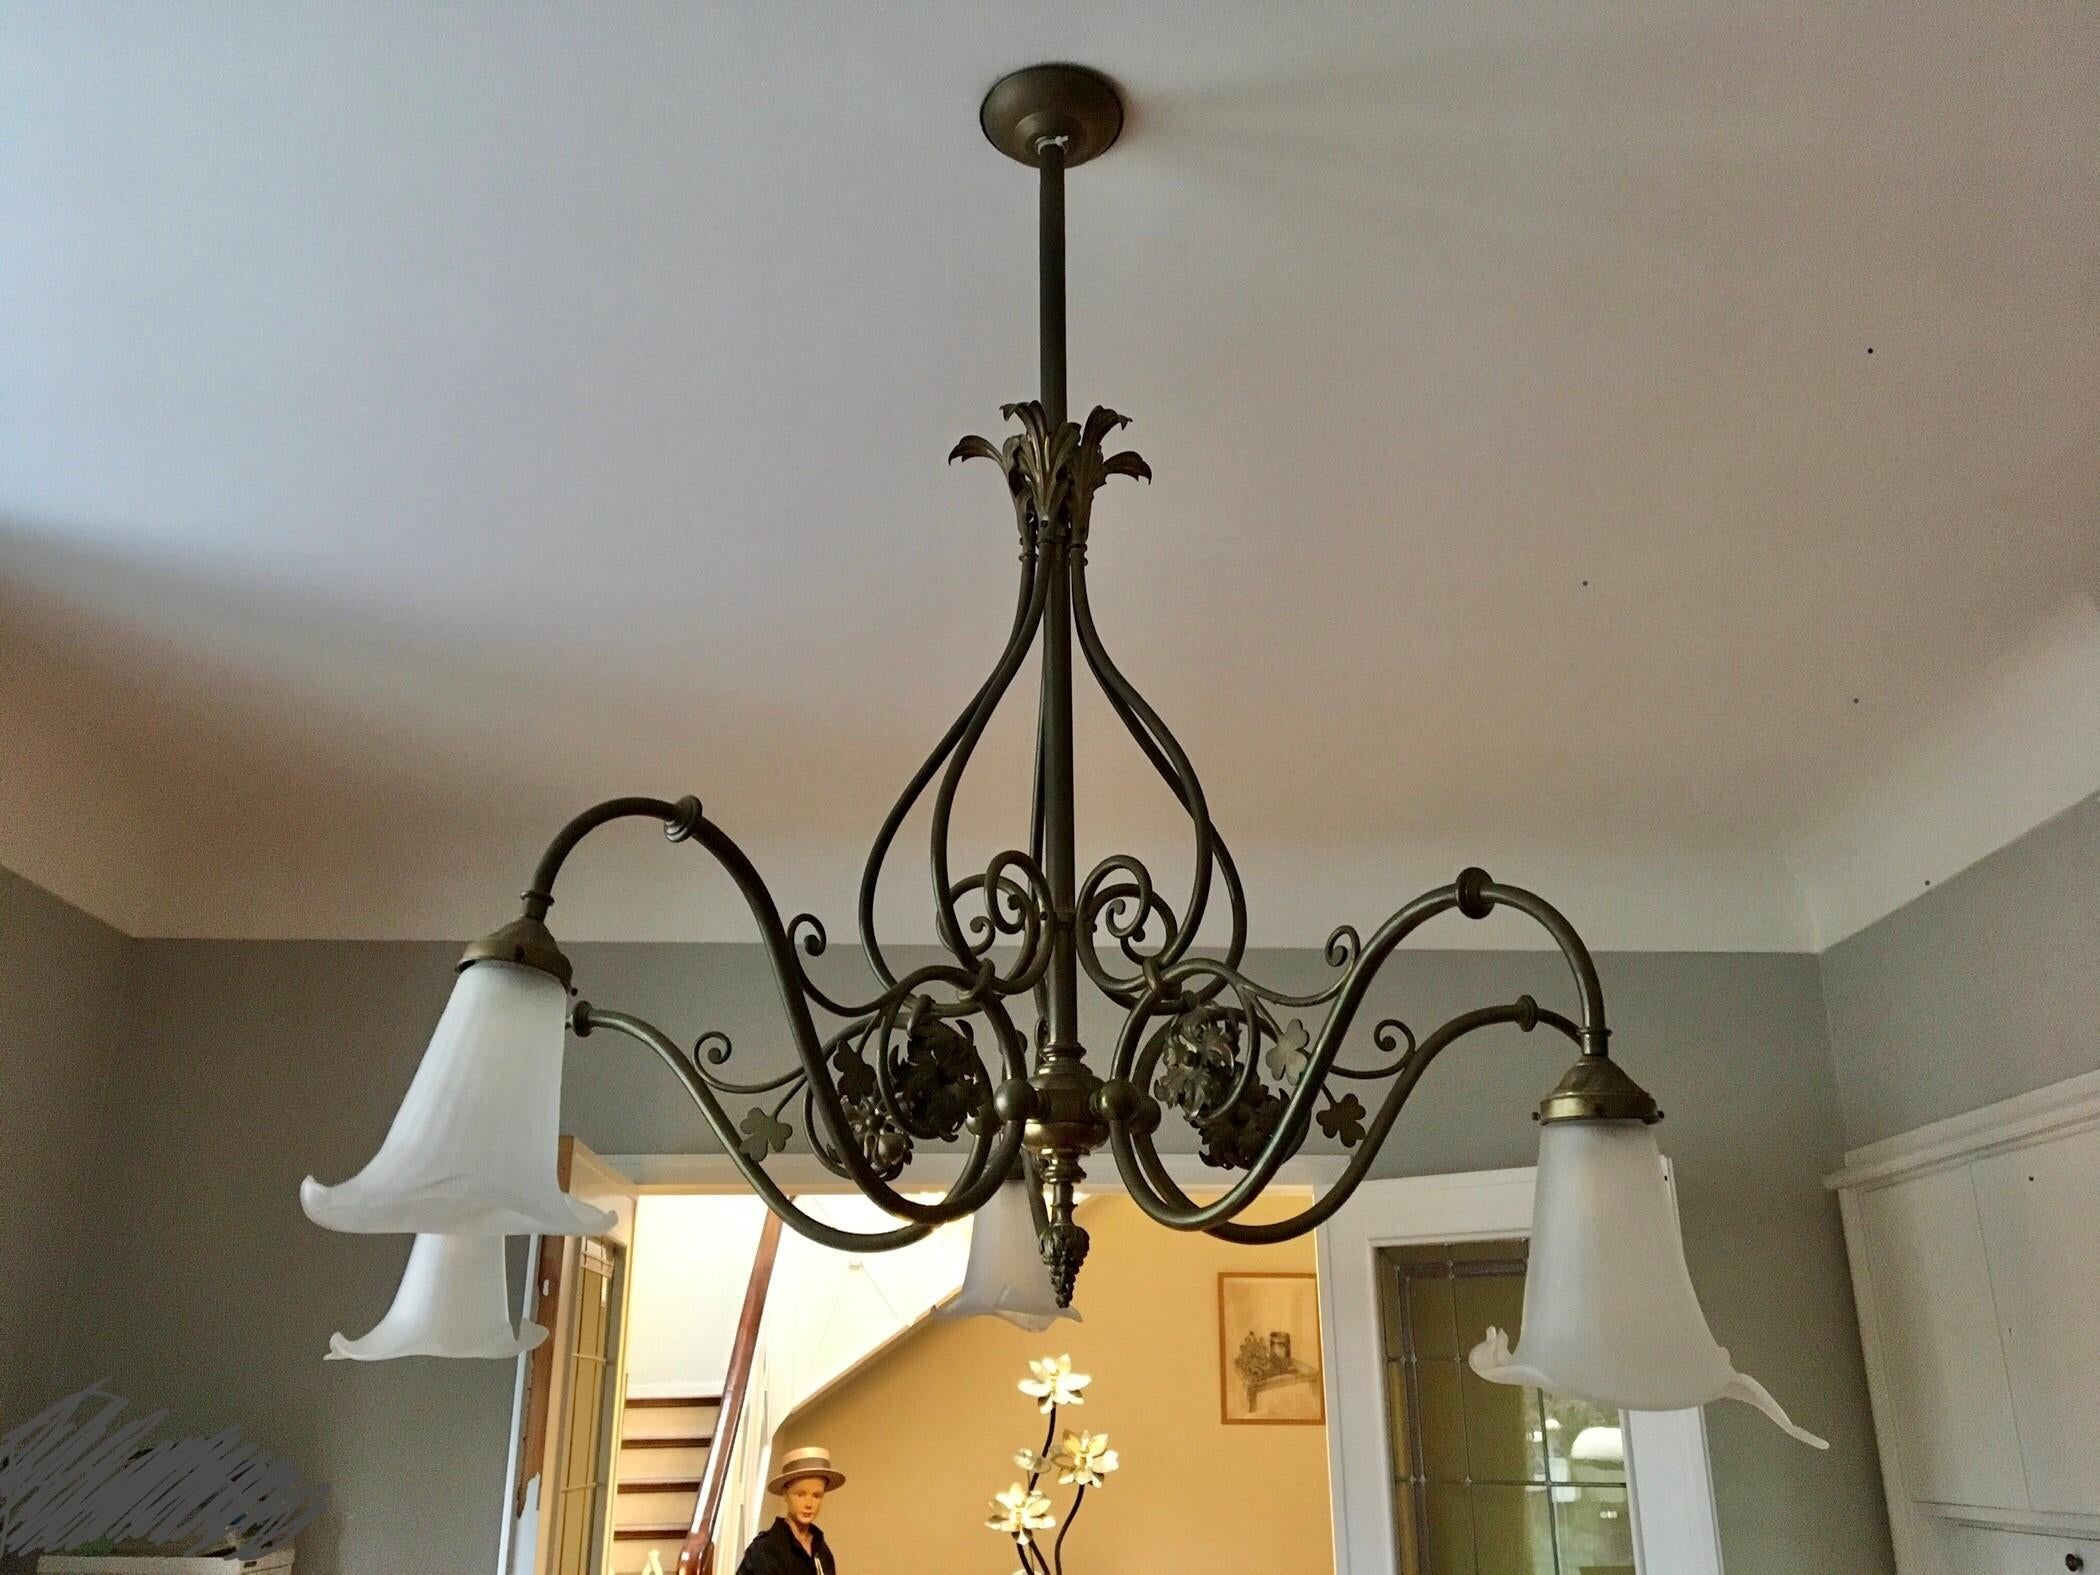 5-armed Art Nouveau Chandelier with Tulip Flowers and Leaves For Sale 12